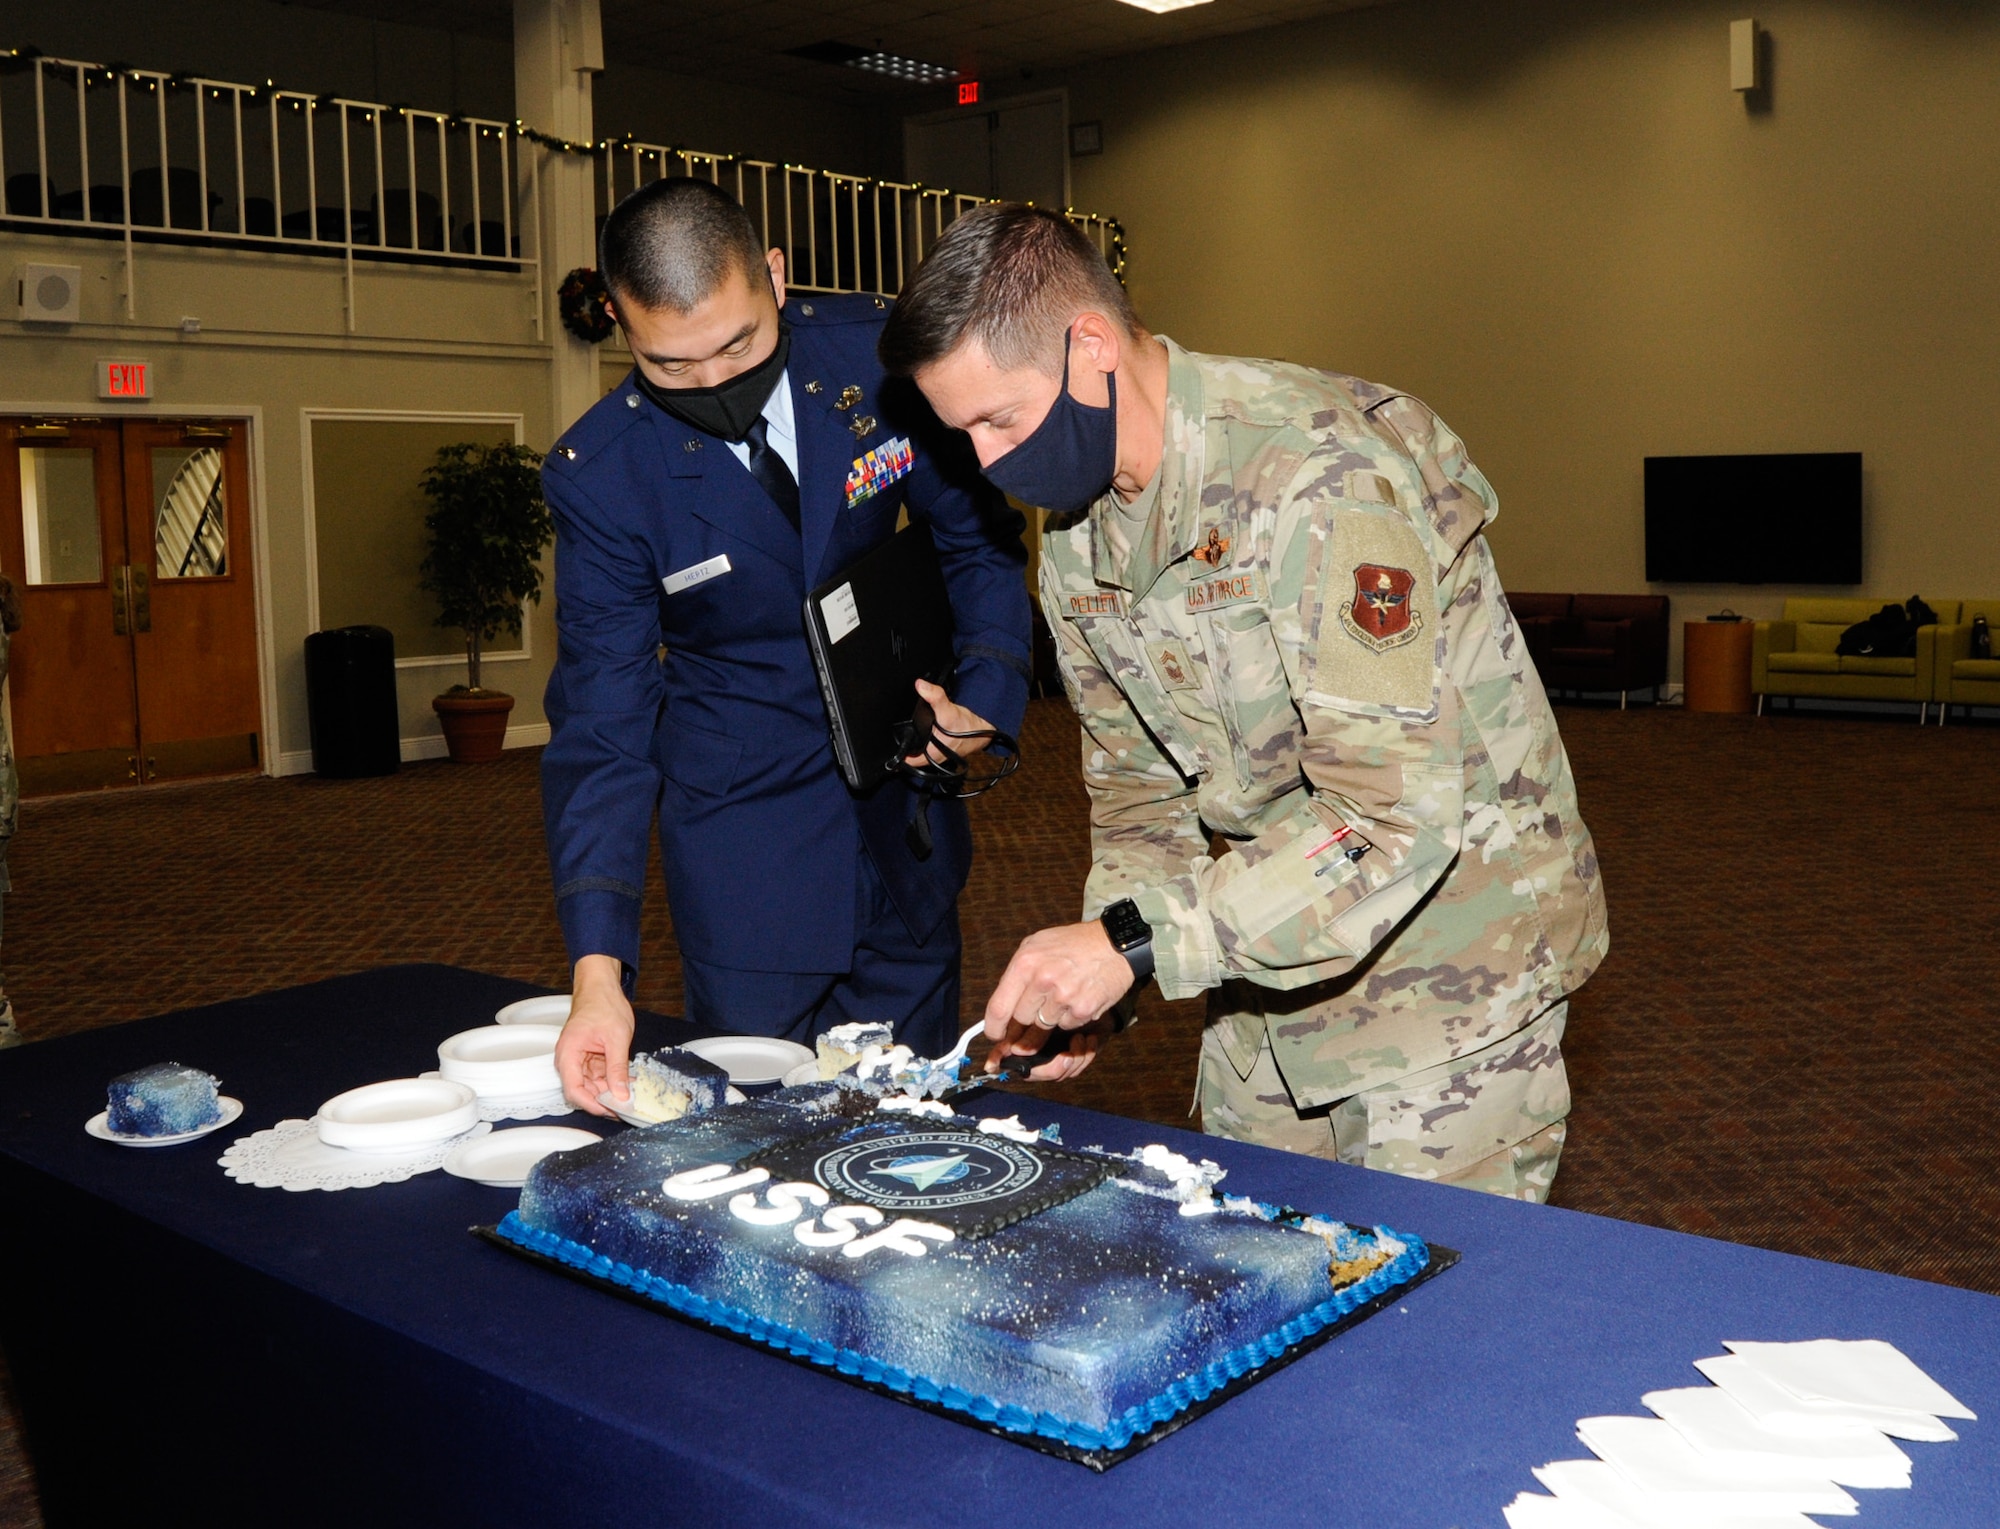 Two Airmen cut USSF 2nd birthday cake at JBSA-Lackland